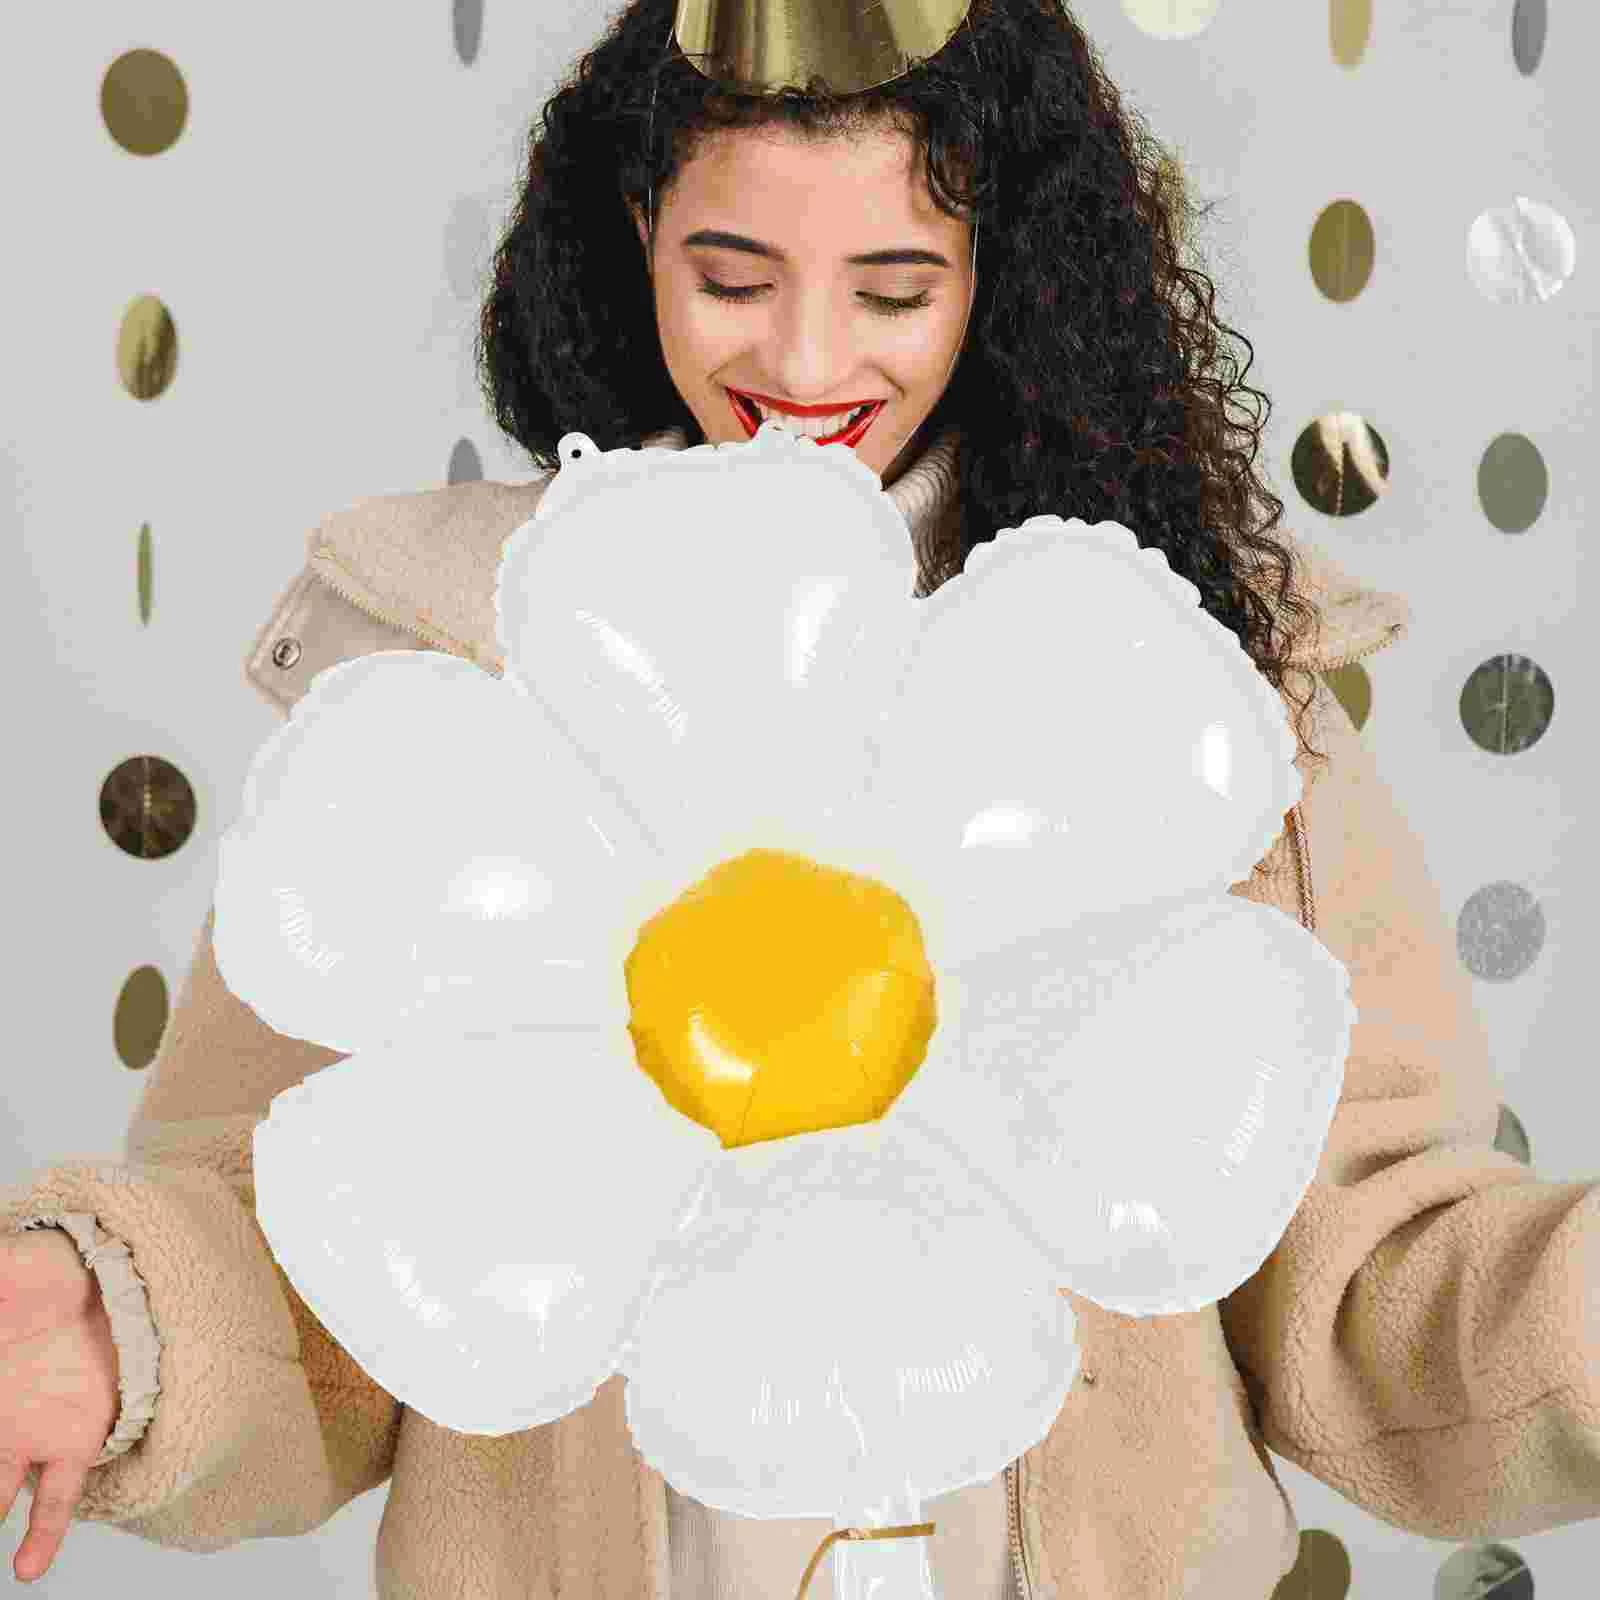 

Balloons Balloon Daisy Flower Floral Party White Birthday Foil Mylar Shaped Latexdecorations Anniversary Wedding Ballons